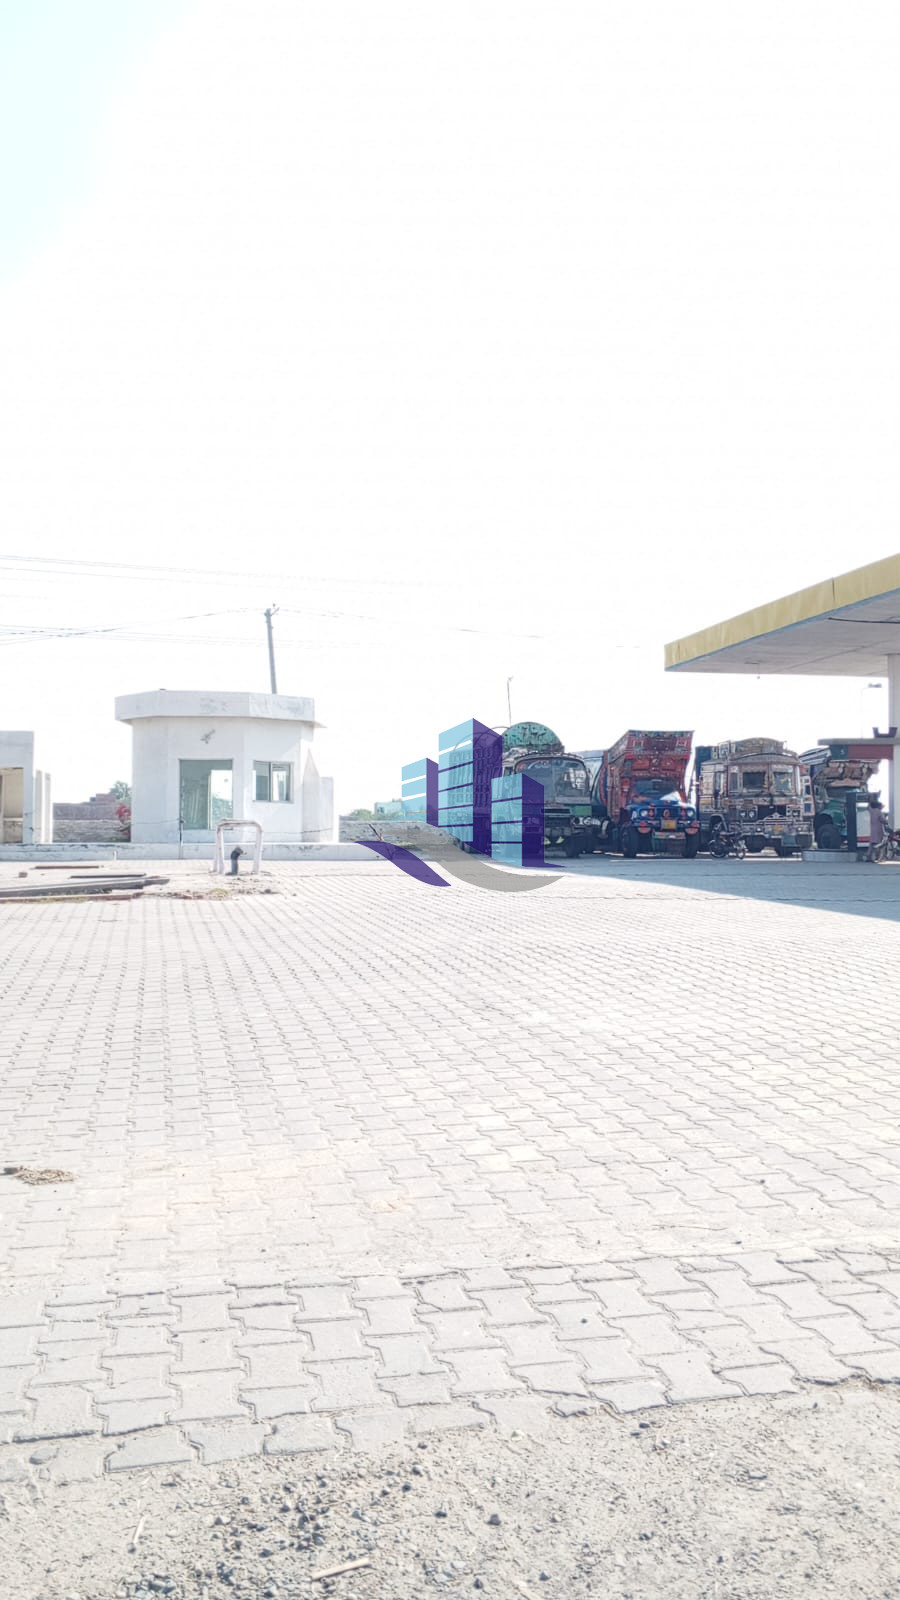 16 Kanal Patrol Pump Land For Sale With Running Condition